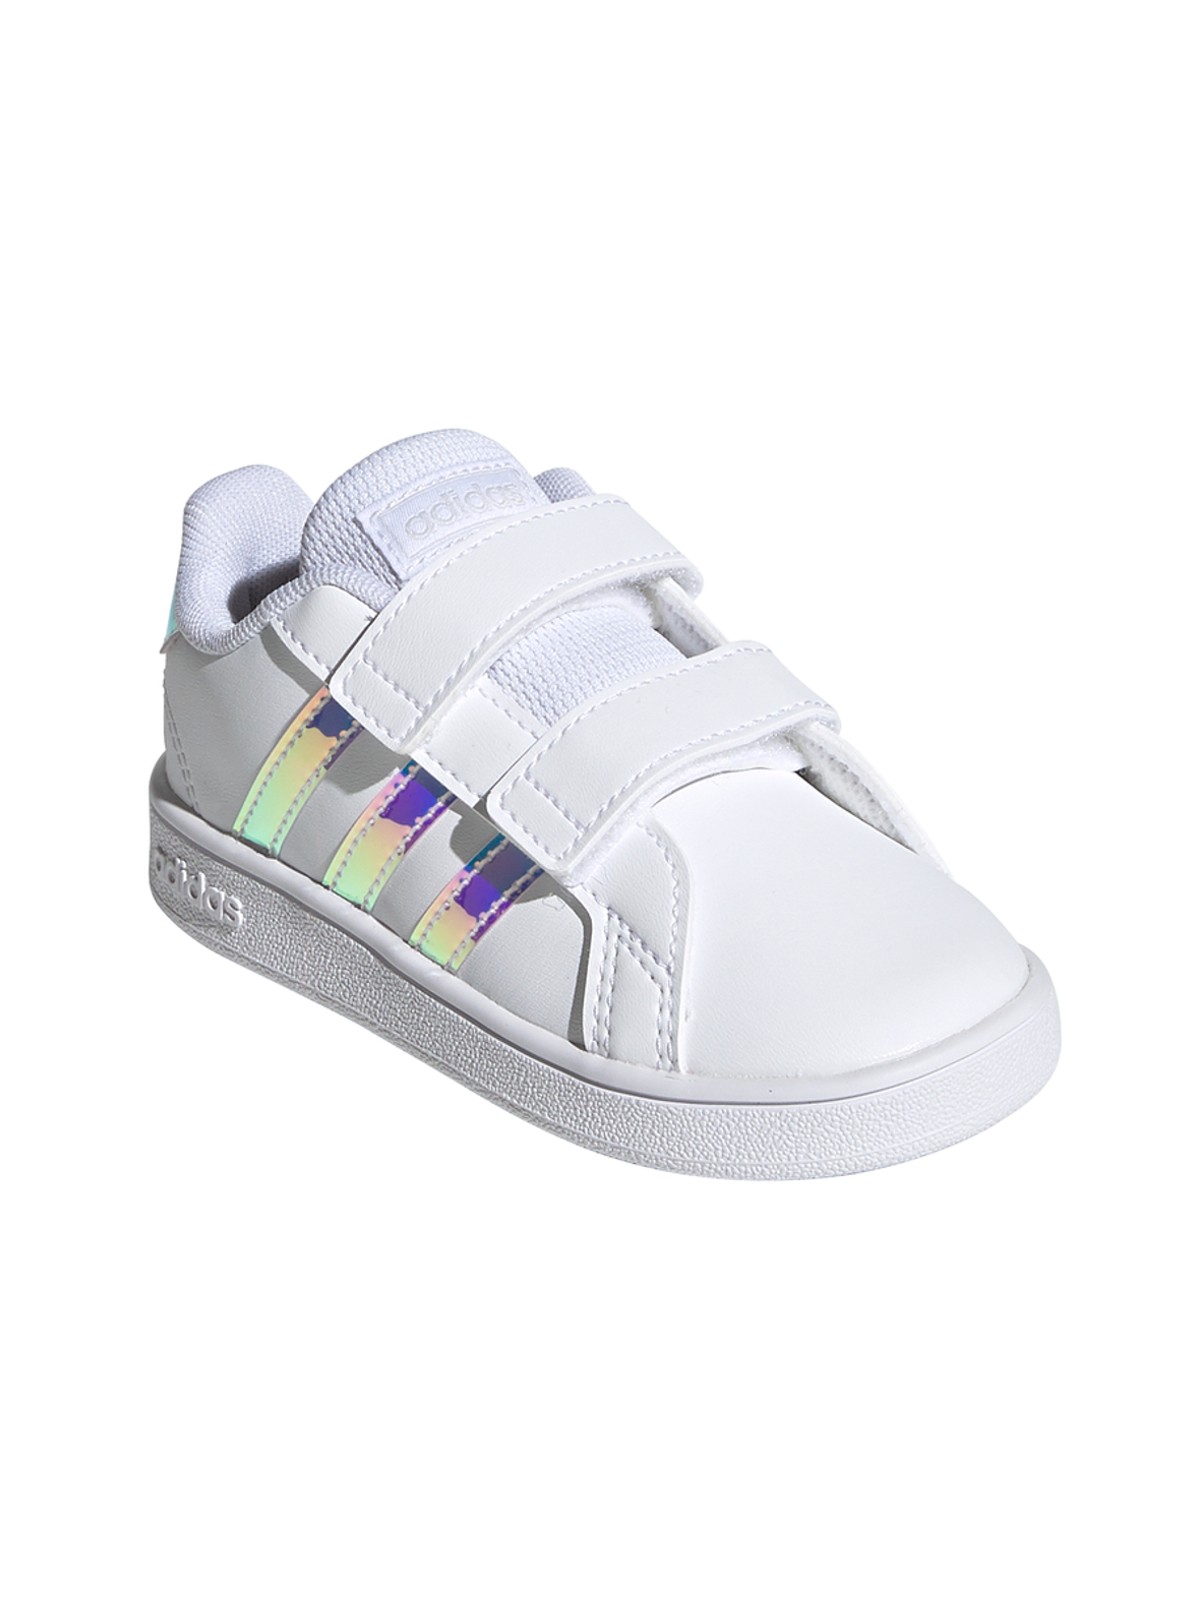 chaussure fille 20 adidas